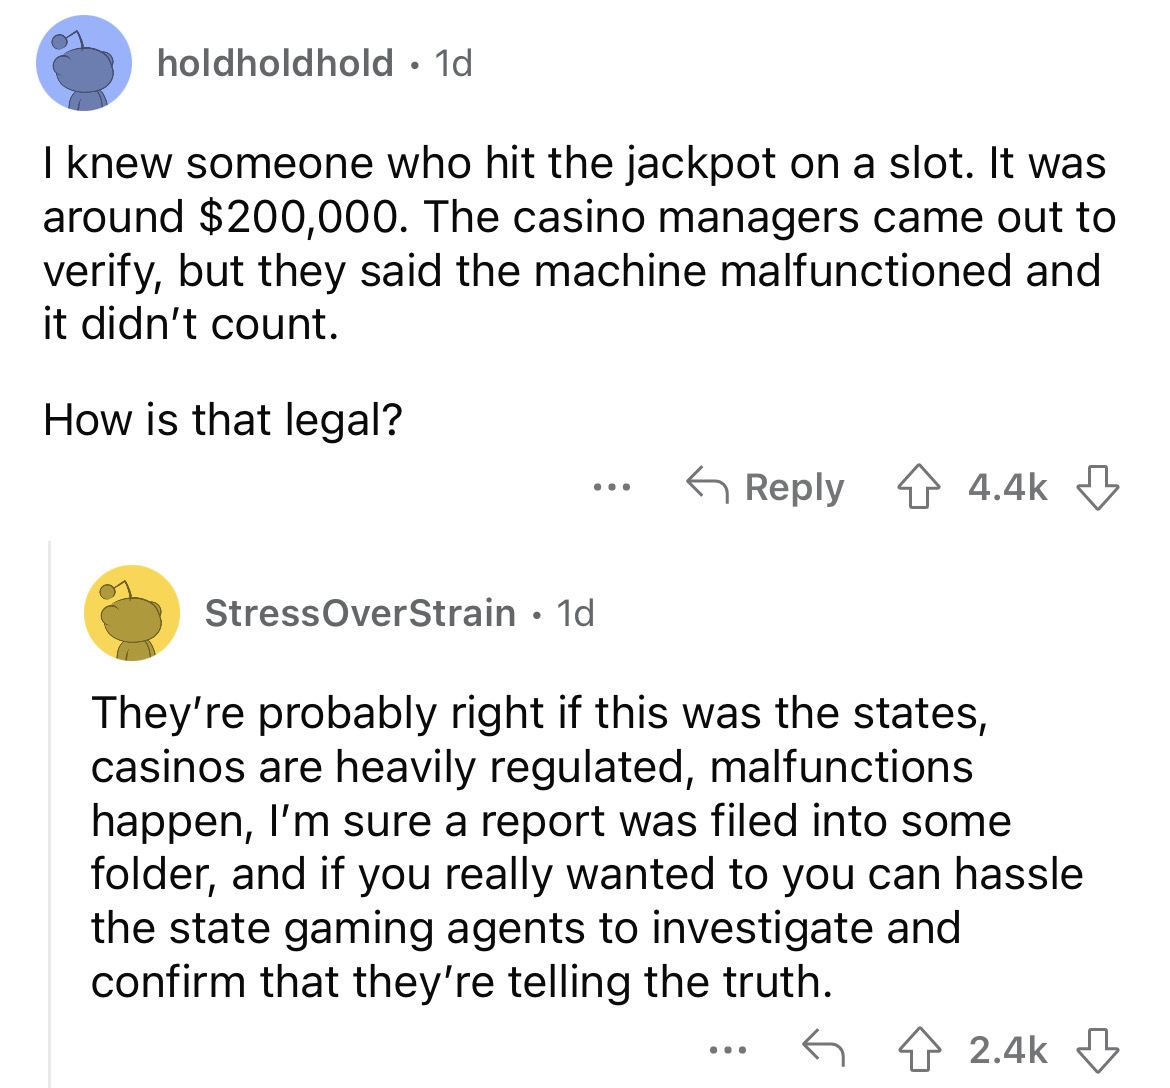 angle - holdholdhold. 1d I knew someone who hit the jackpot on a slot. It was around $200,000. The casino managers came out to verify, but they said the machine malfunctioned and it didn't count. How is that legal? ... StressOverStrain 1d They're probably